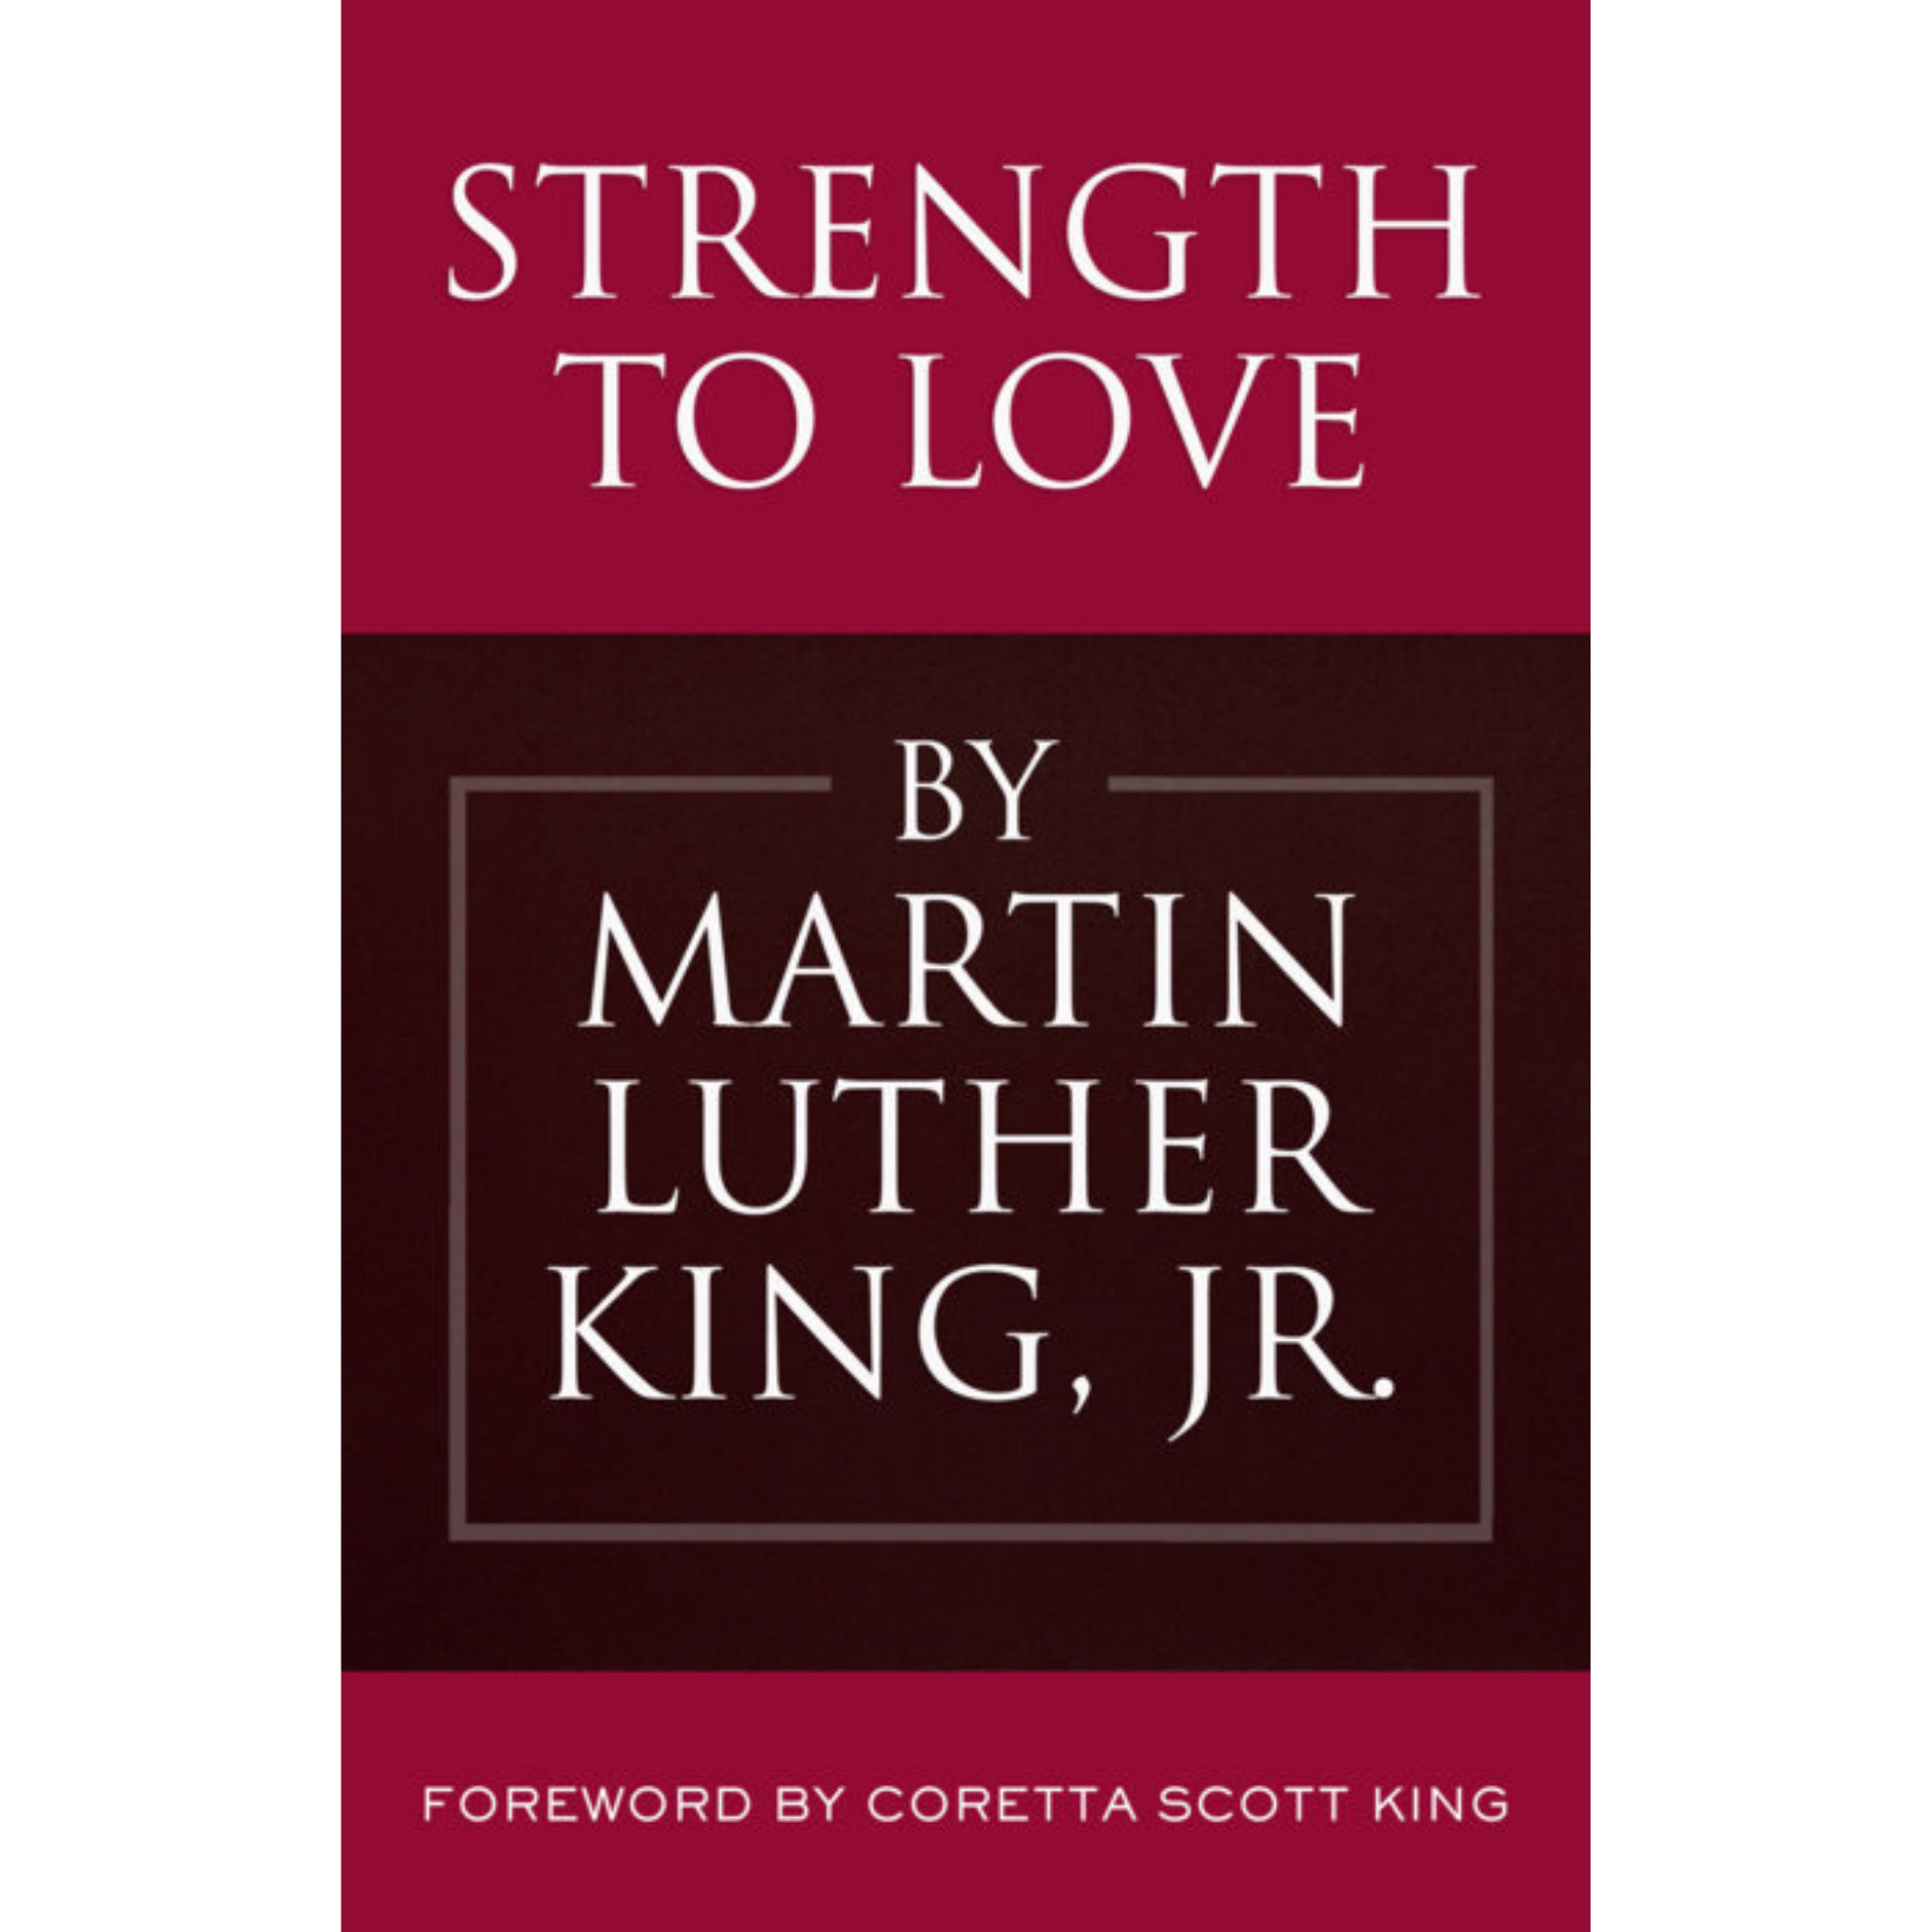 strength to love martin luther king jr